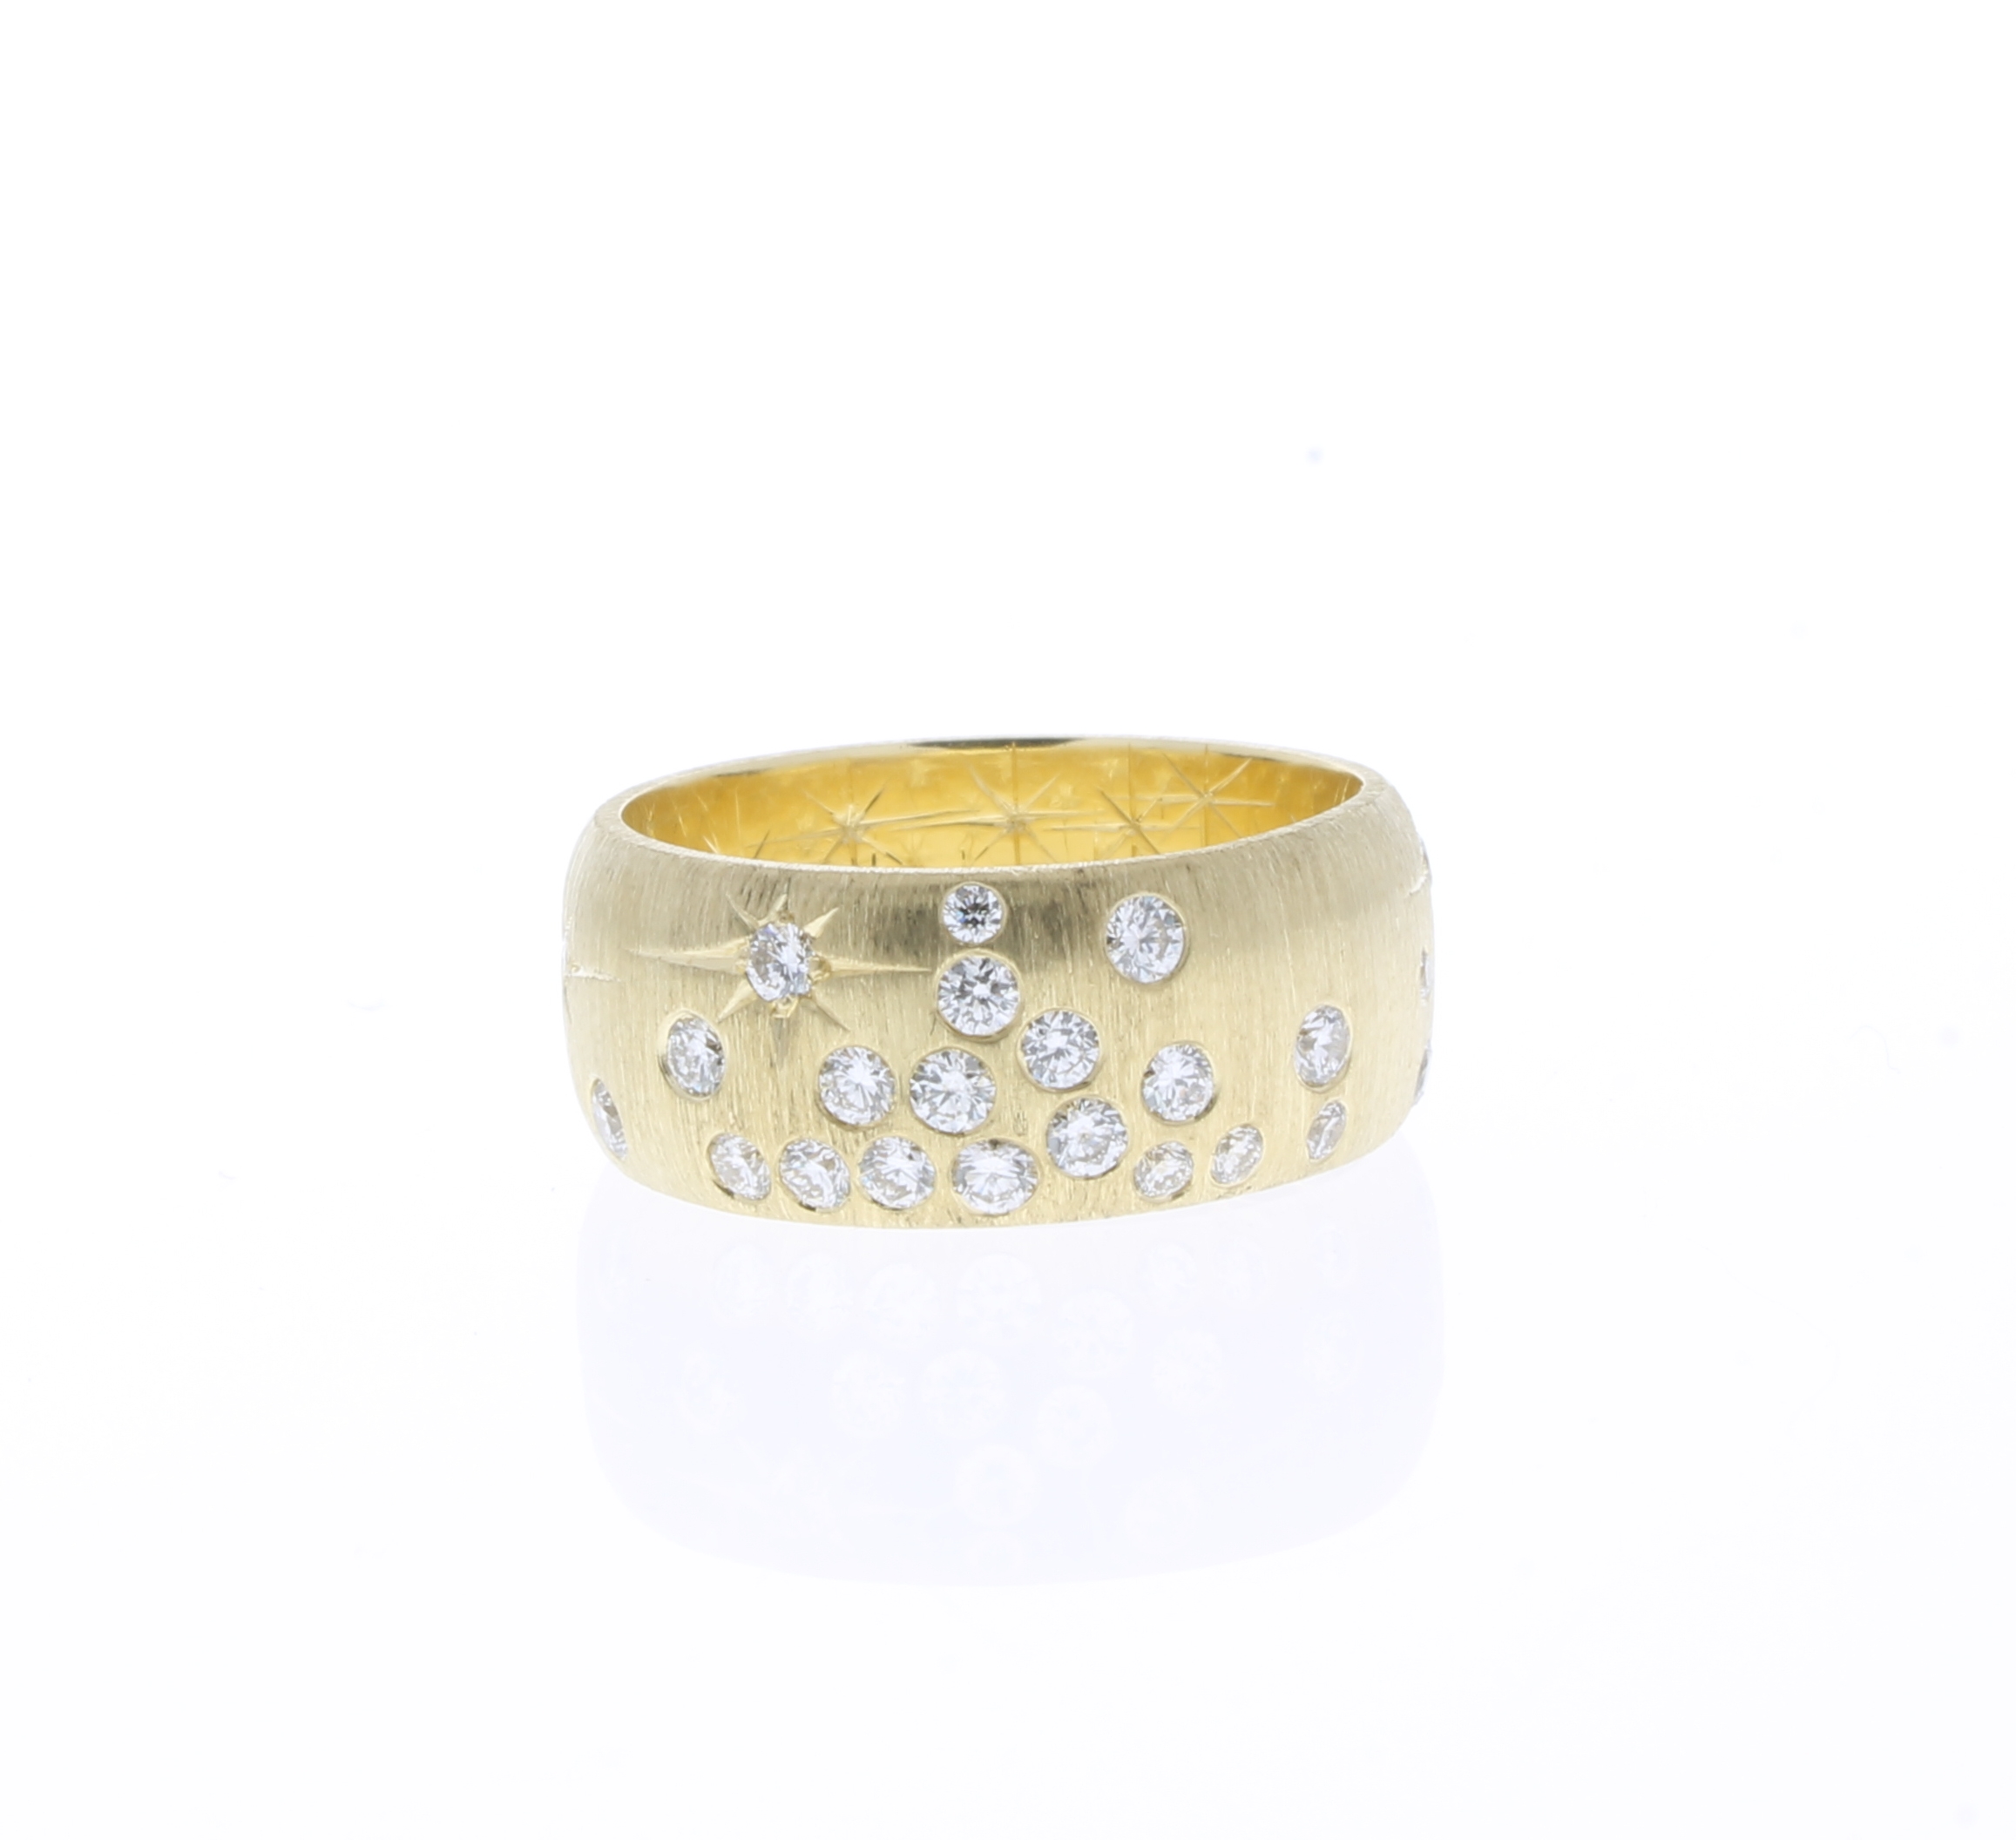 Penny Preville 18k yellow gold galaxy band with diamonds weighing 1.09 carat total weight